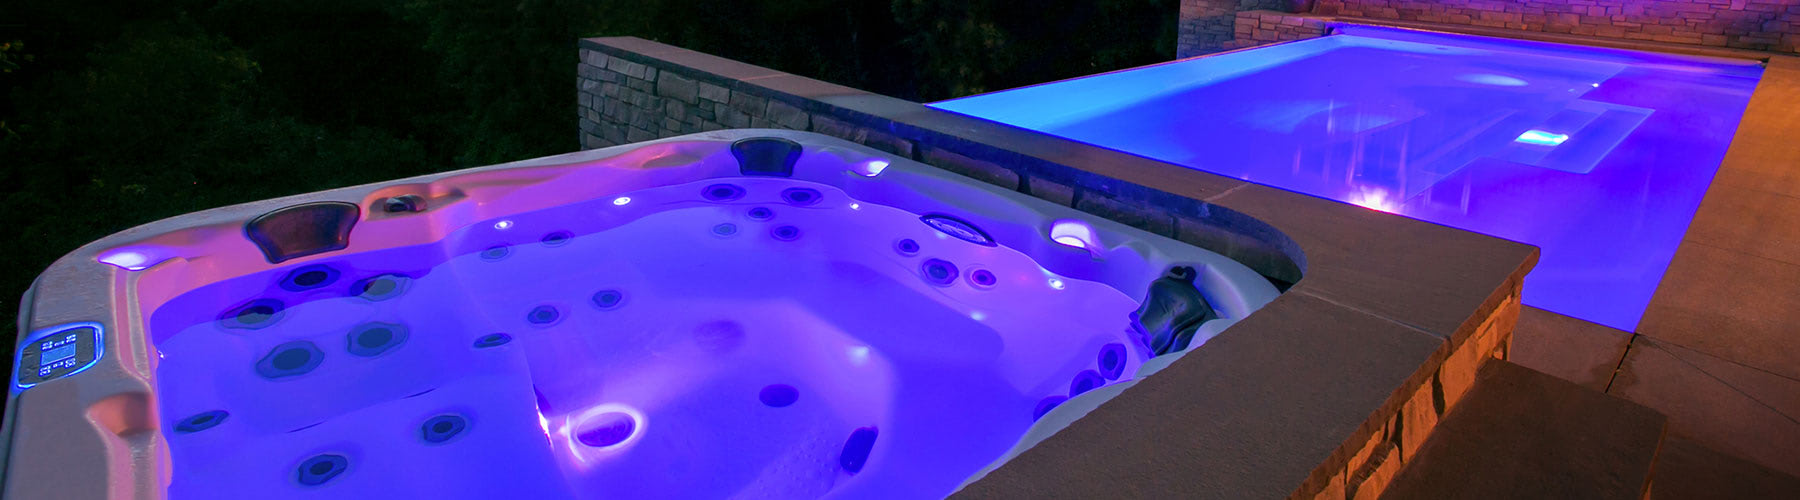 Pool Inspiration Gallery